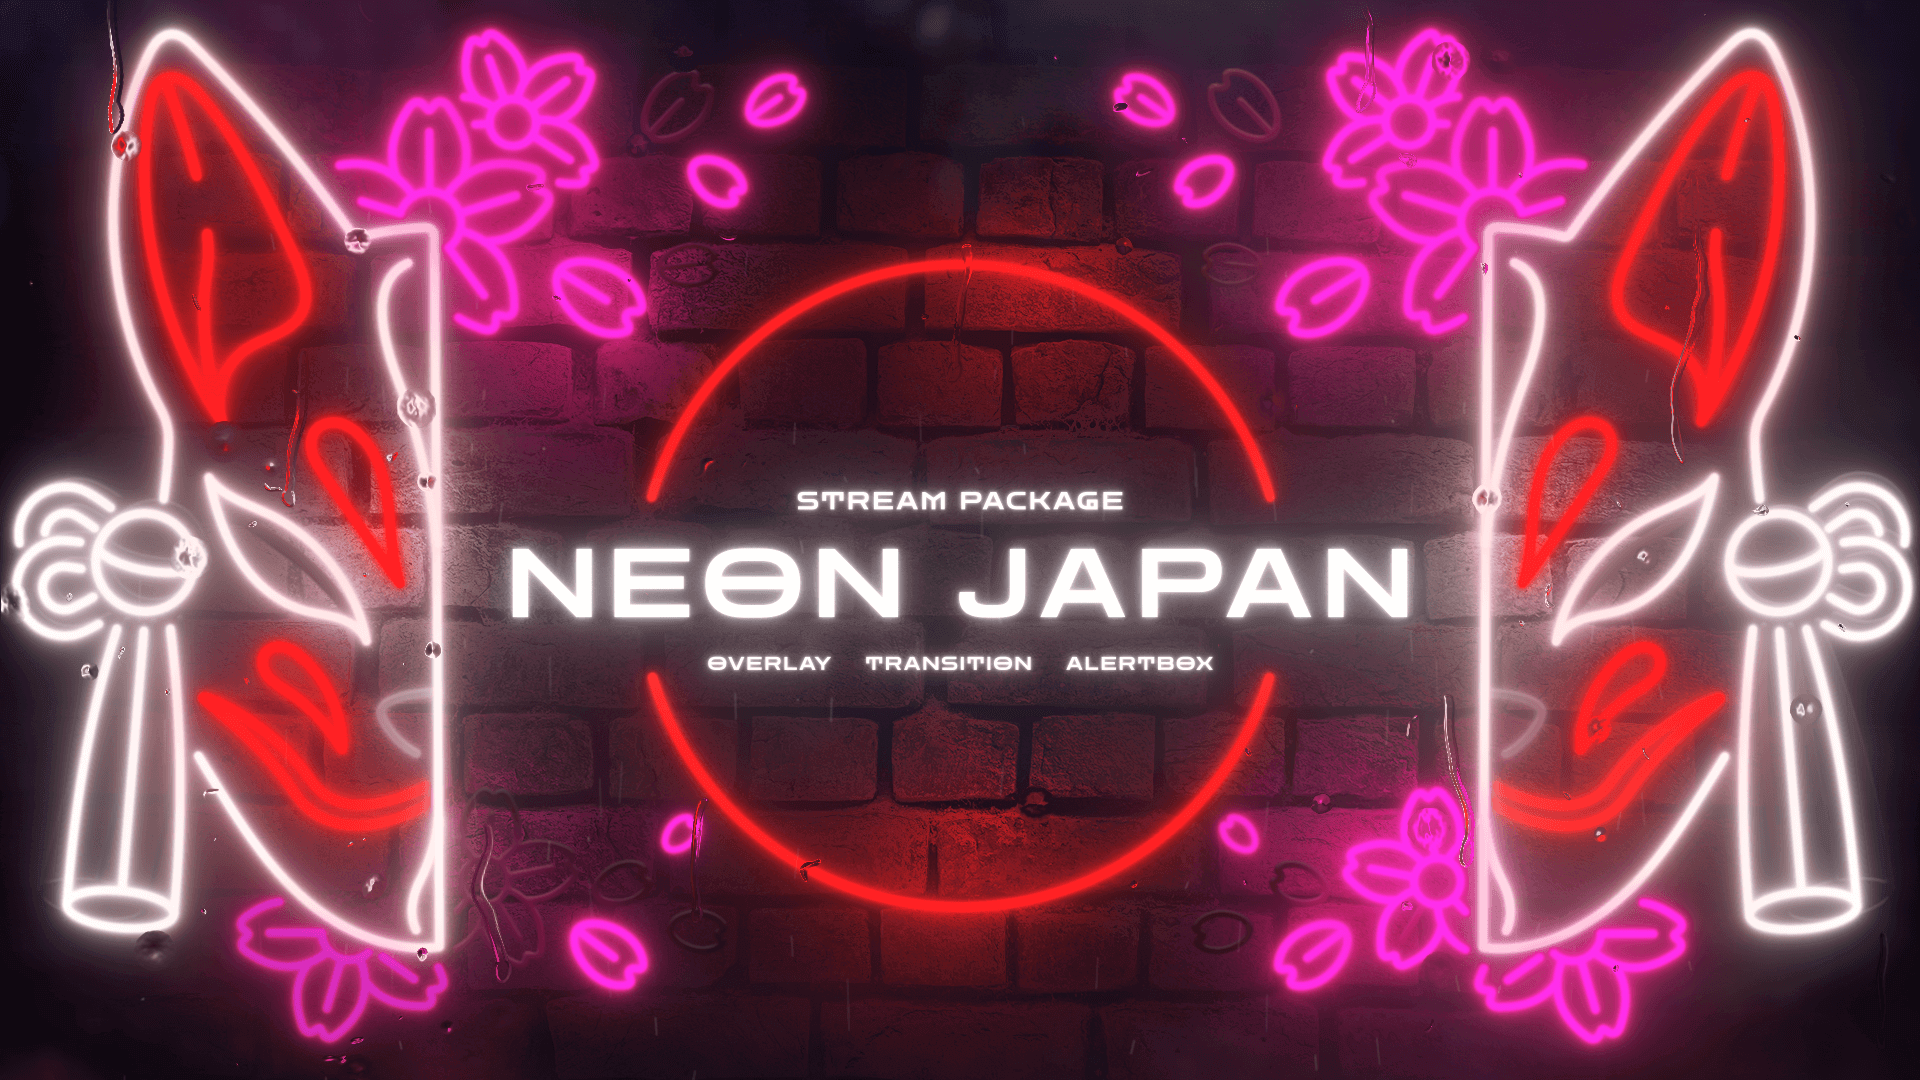 Neon Japan Animated Stream Package with Overlays, Alerts and Transition for Twitch and OBS Studio